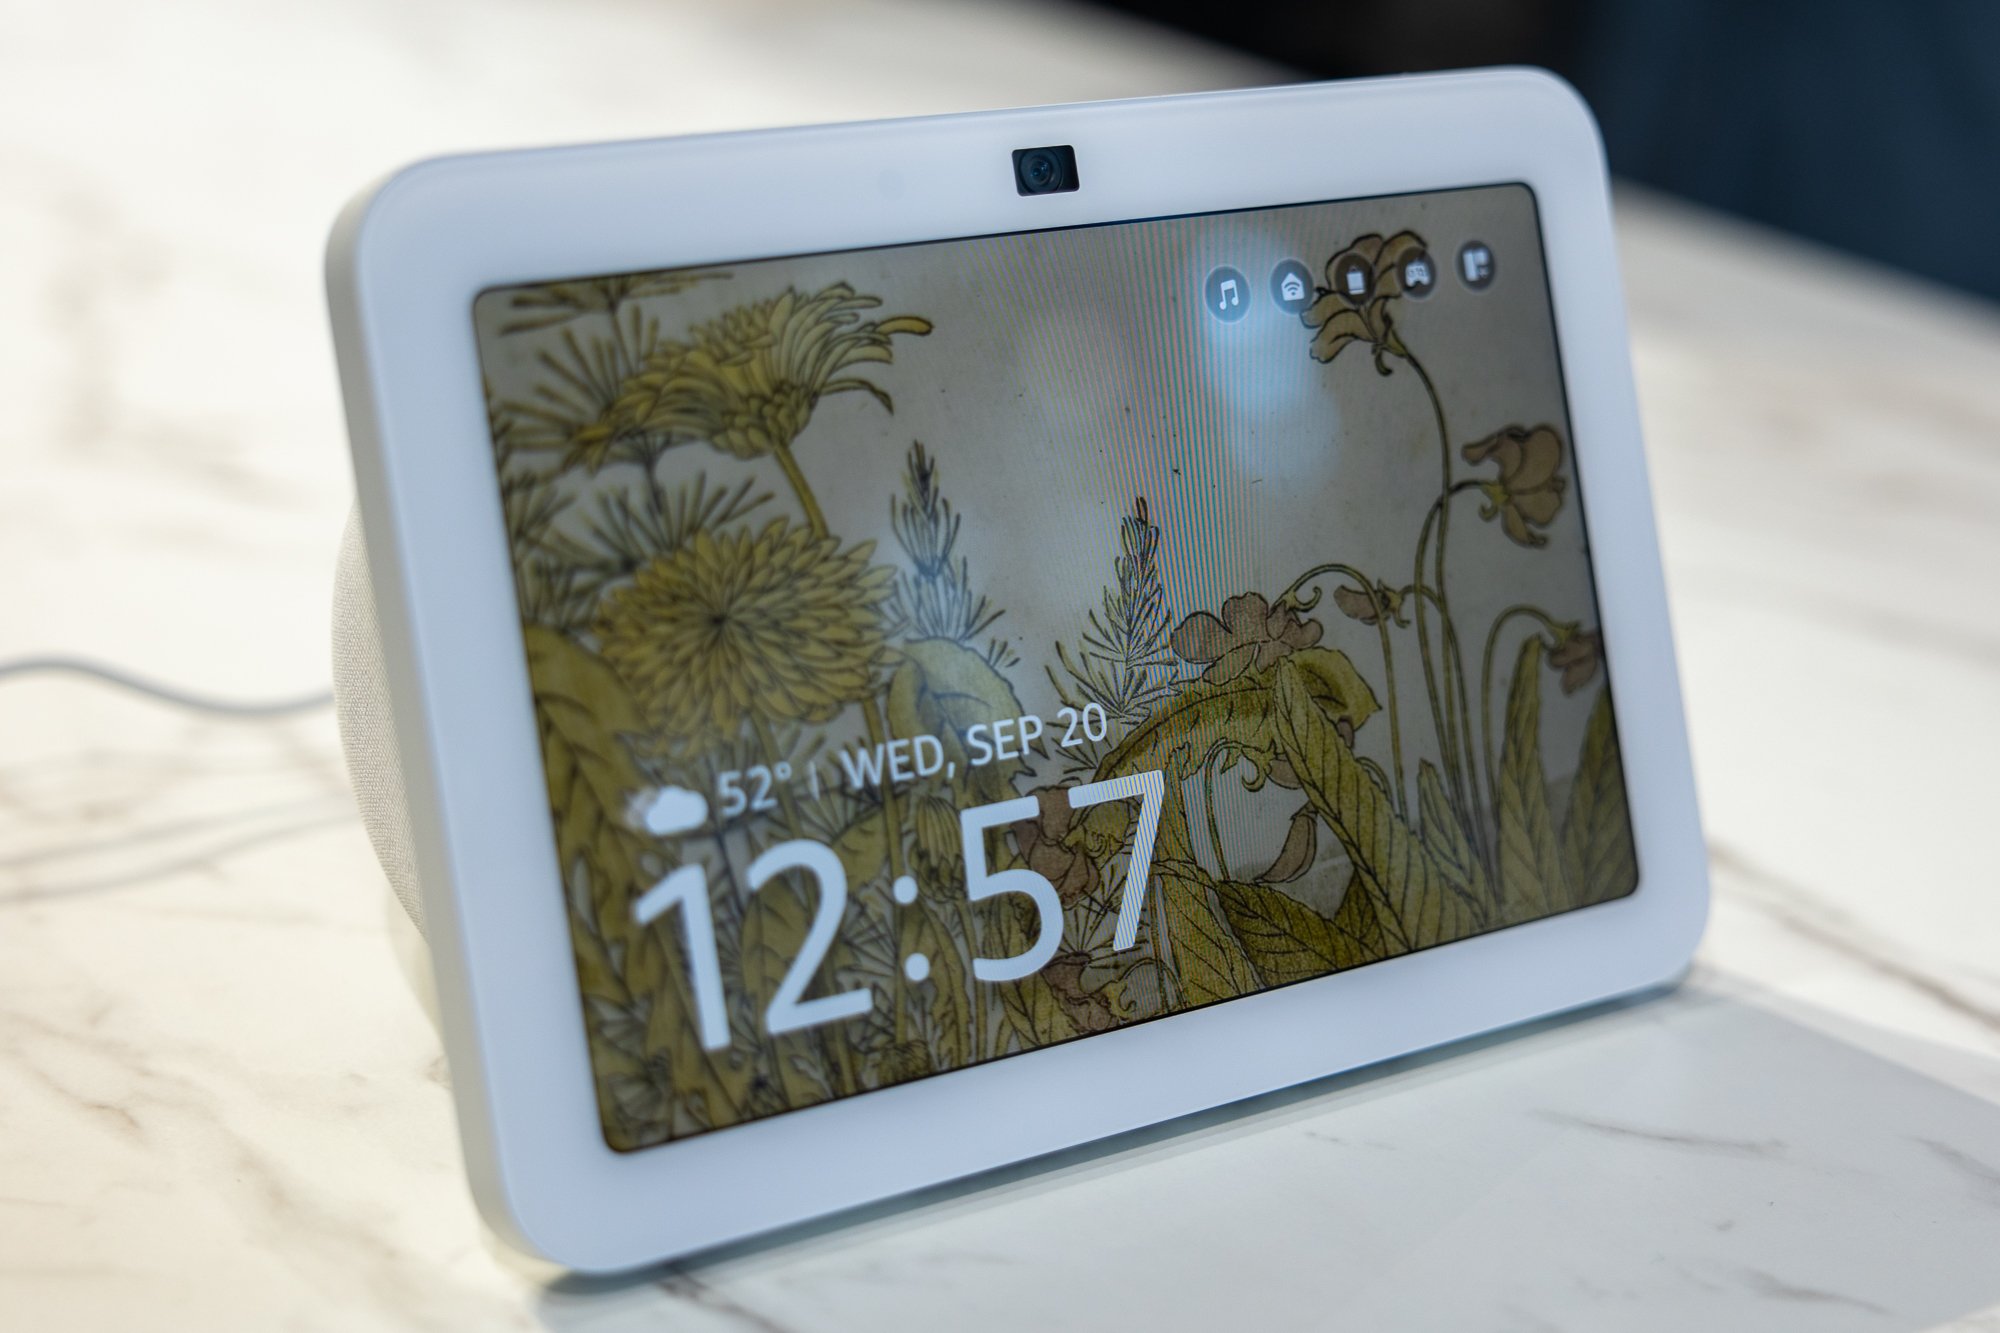 Hands-on with the 3rd-gen  Echo Show 8 smart display